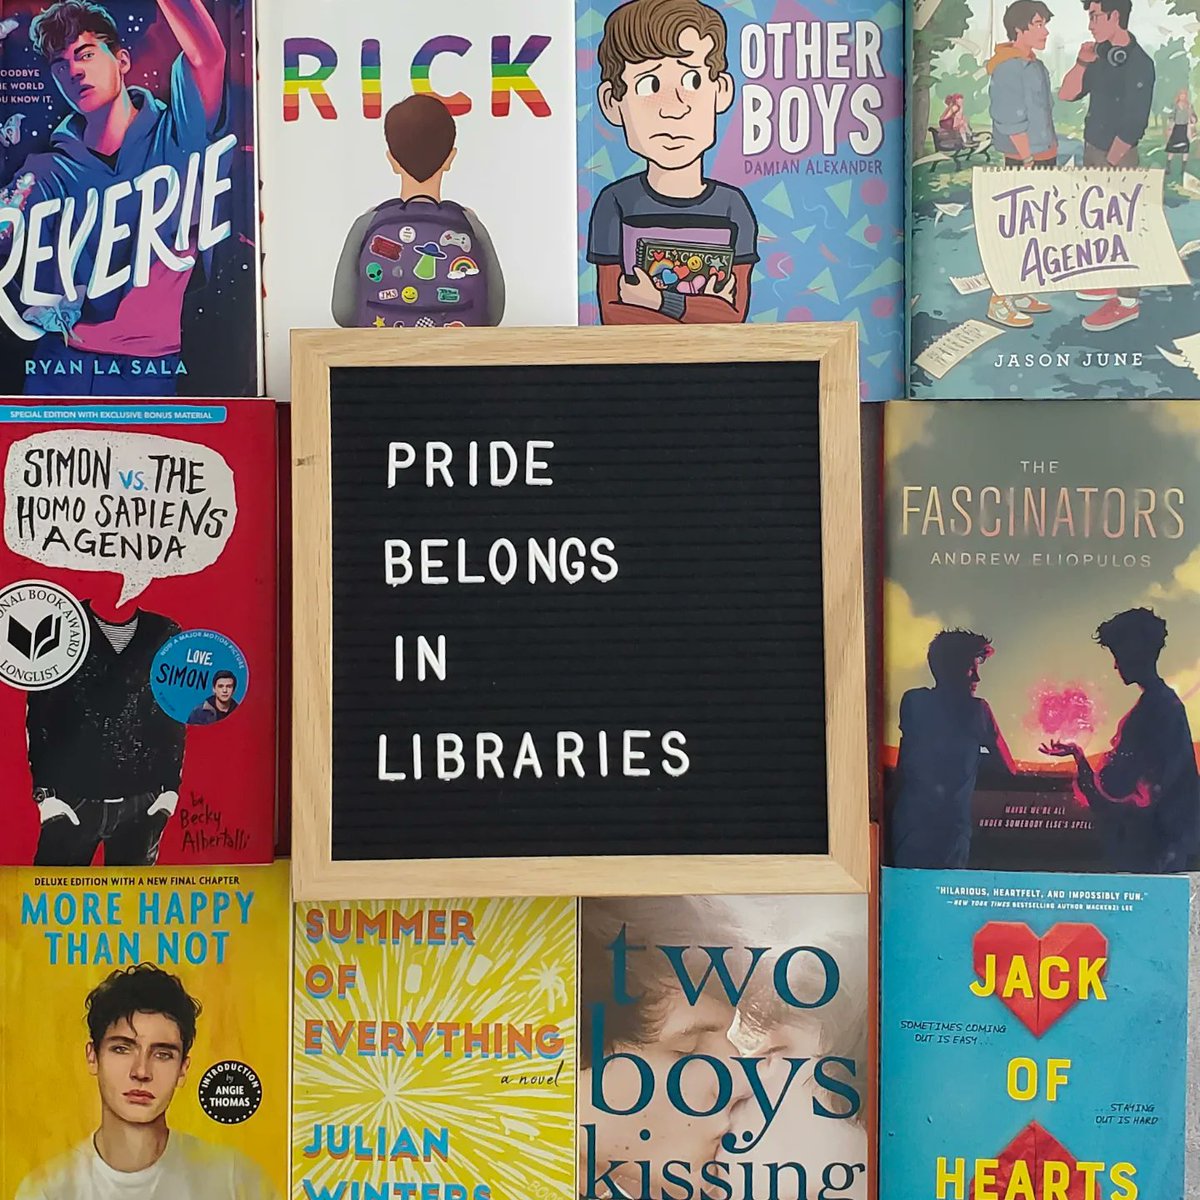 A reminder that Pride belongs in libraries and should never be hidden